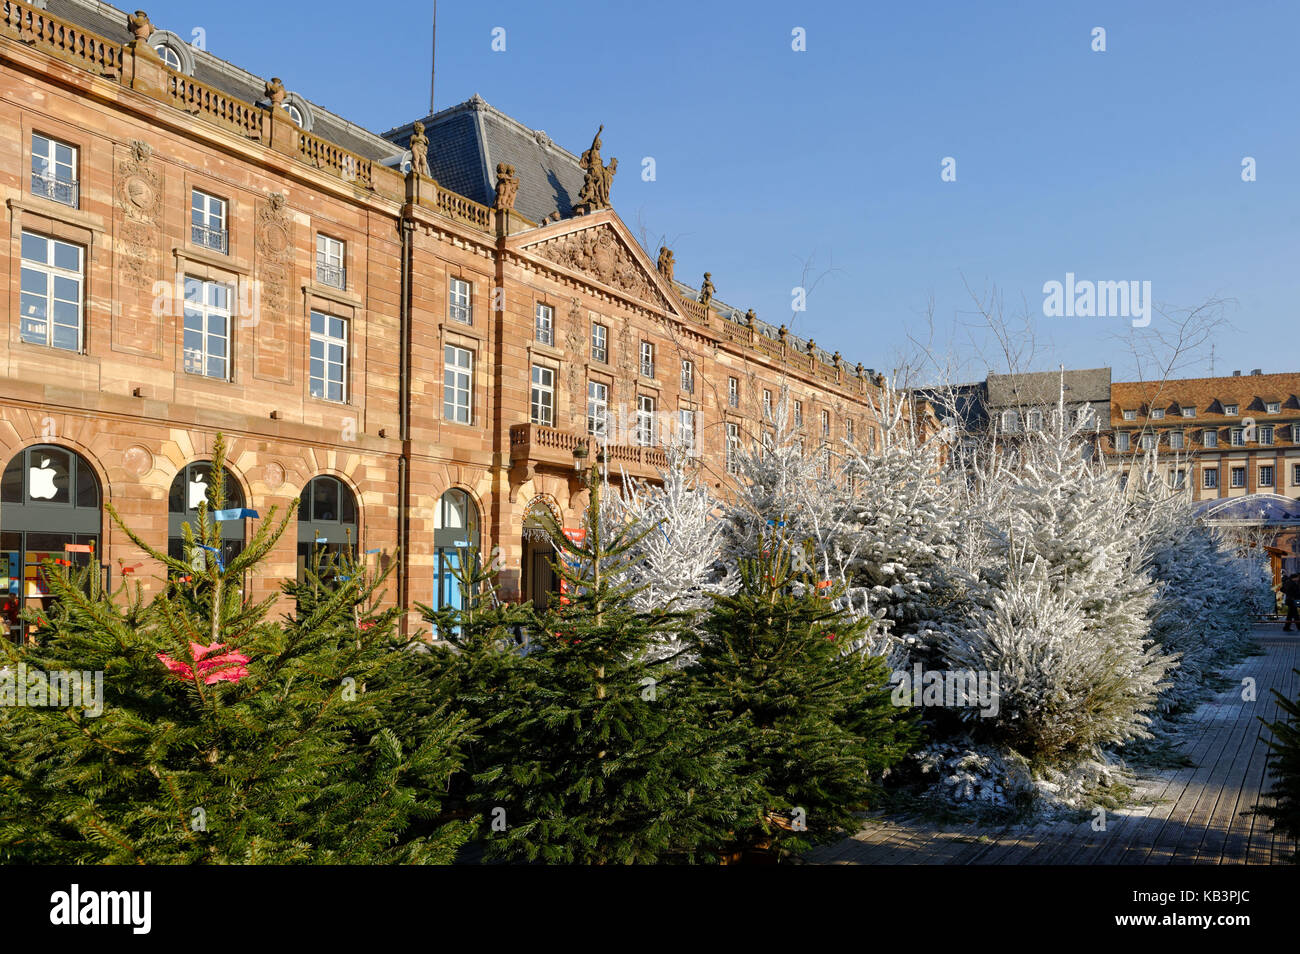 France, Bas Rhin, Strasbourg, old town listed as World Heritage by UNESCO, Christmas at the Place Kleber, sale of fir trees Stock Photo